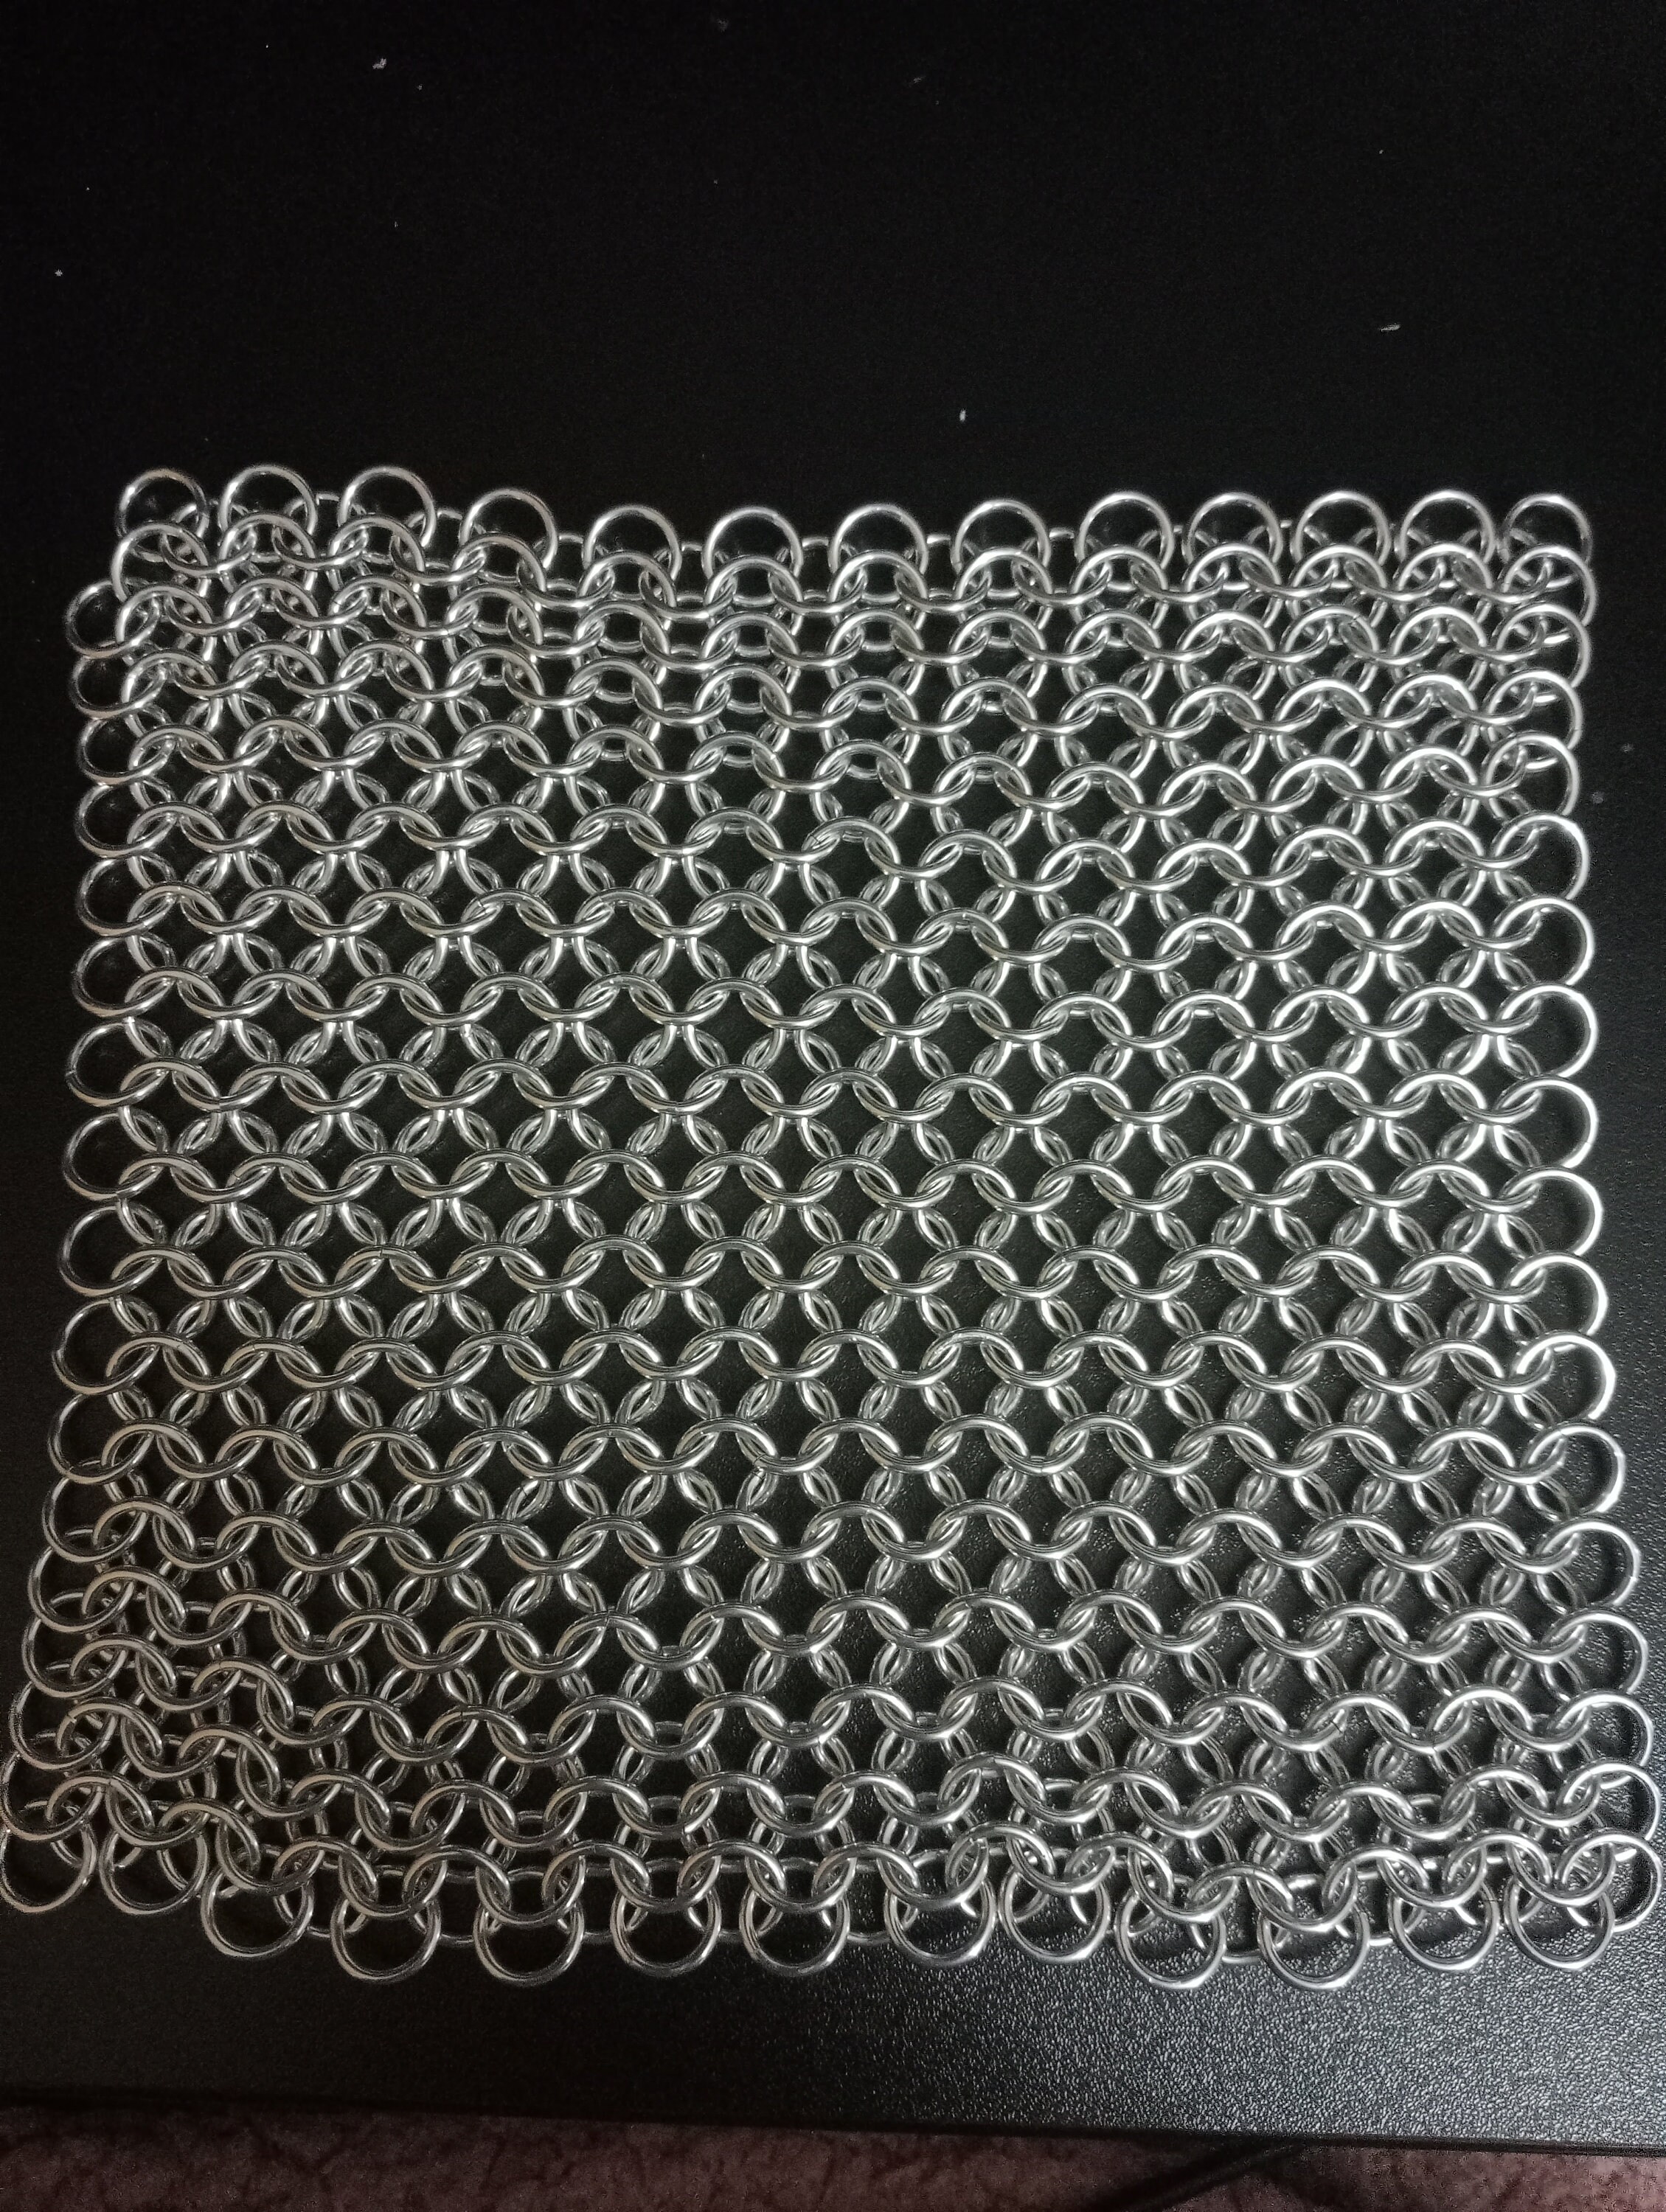 10.5x1.4mm, Stainless Steel Jump Rings, Machine Cut, Chainmaille Rings,  Stainless Steel Jumprings, Chainmail Rings, Chain Maille Supplies 